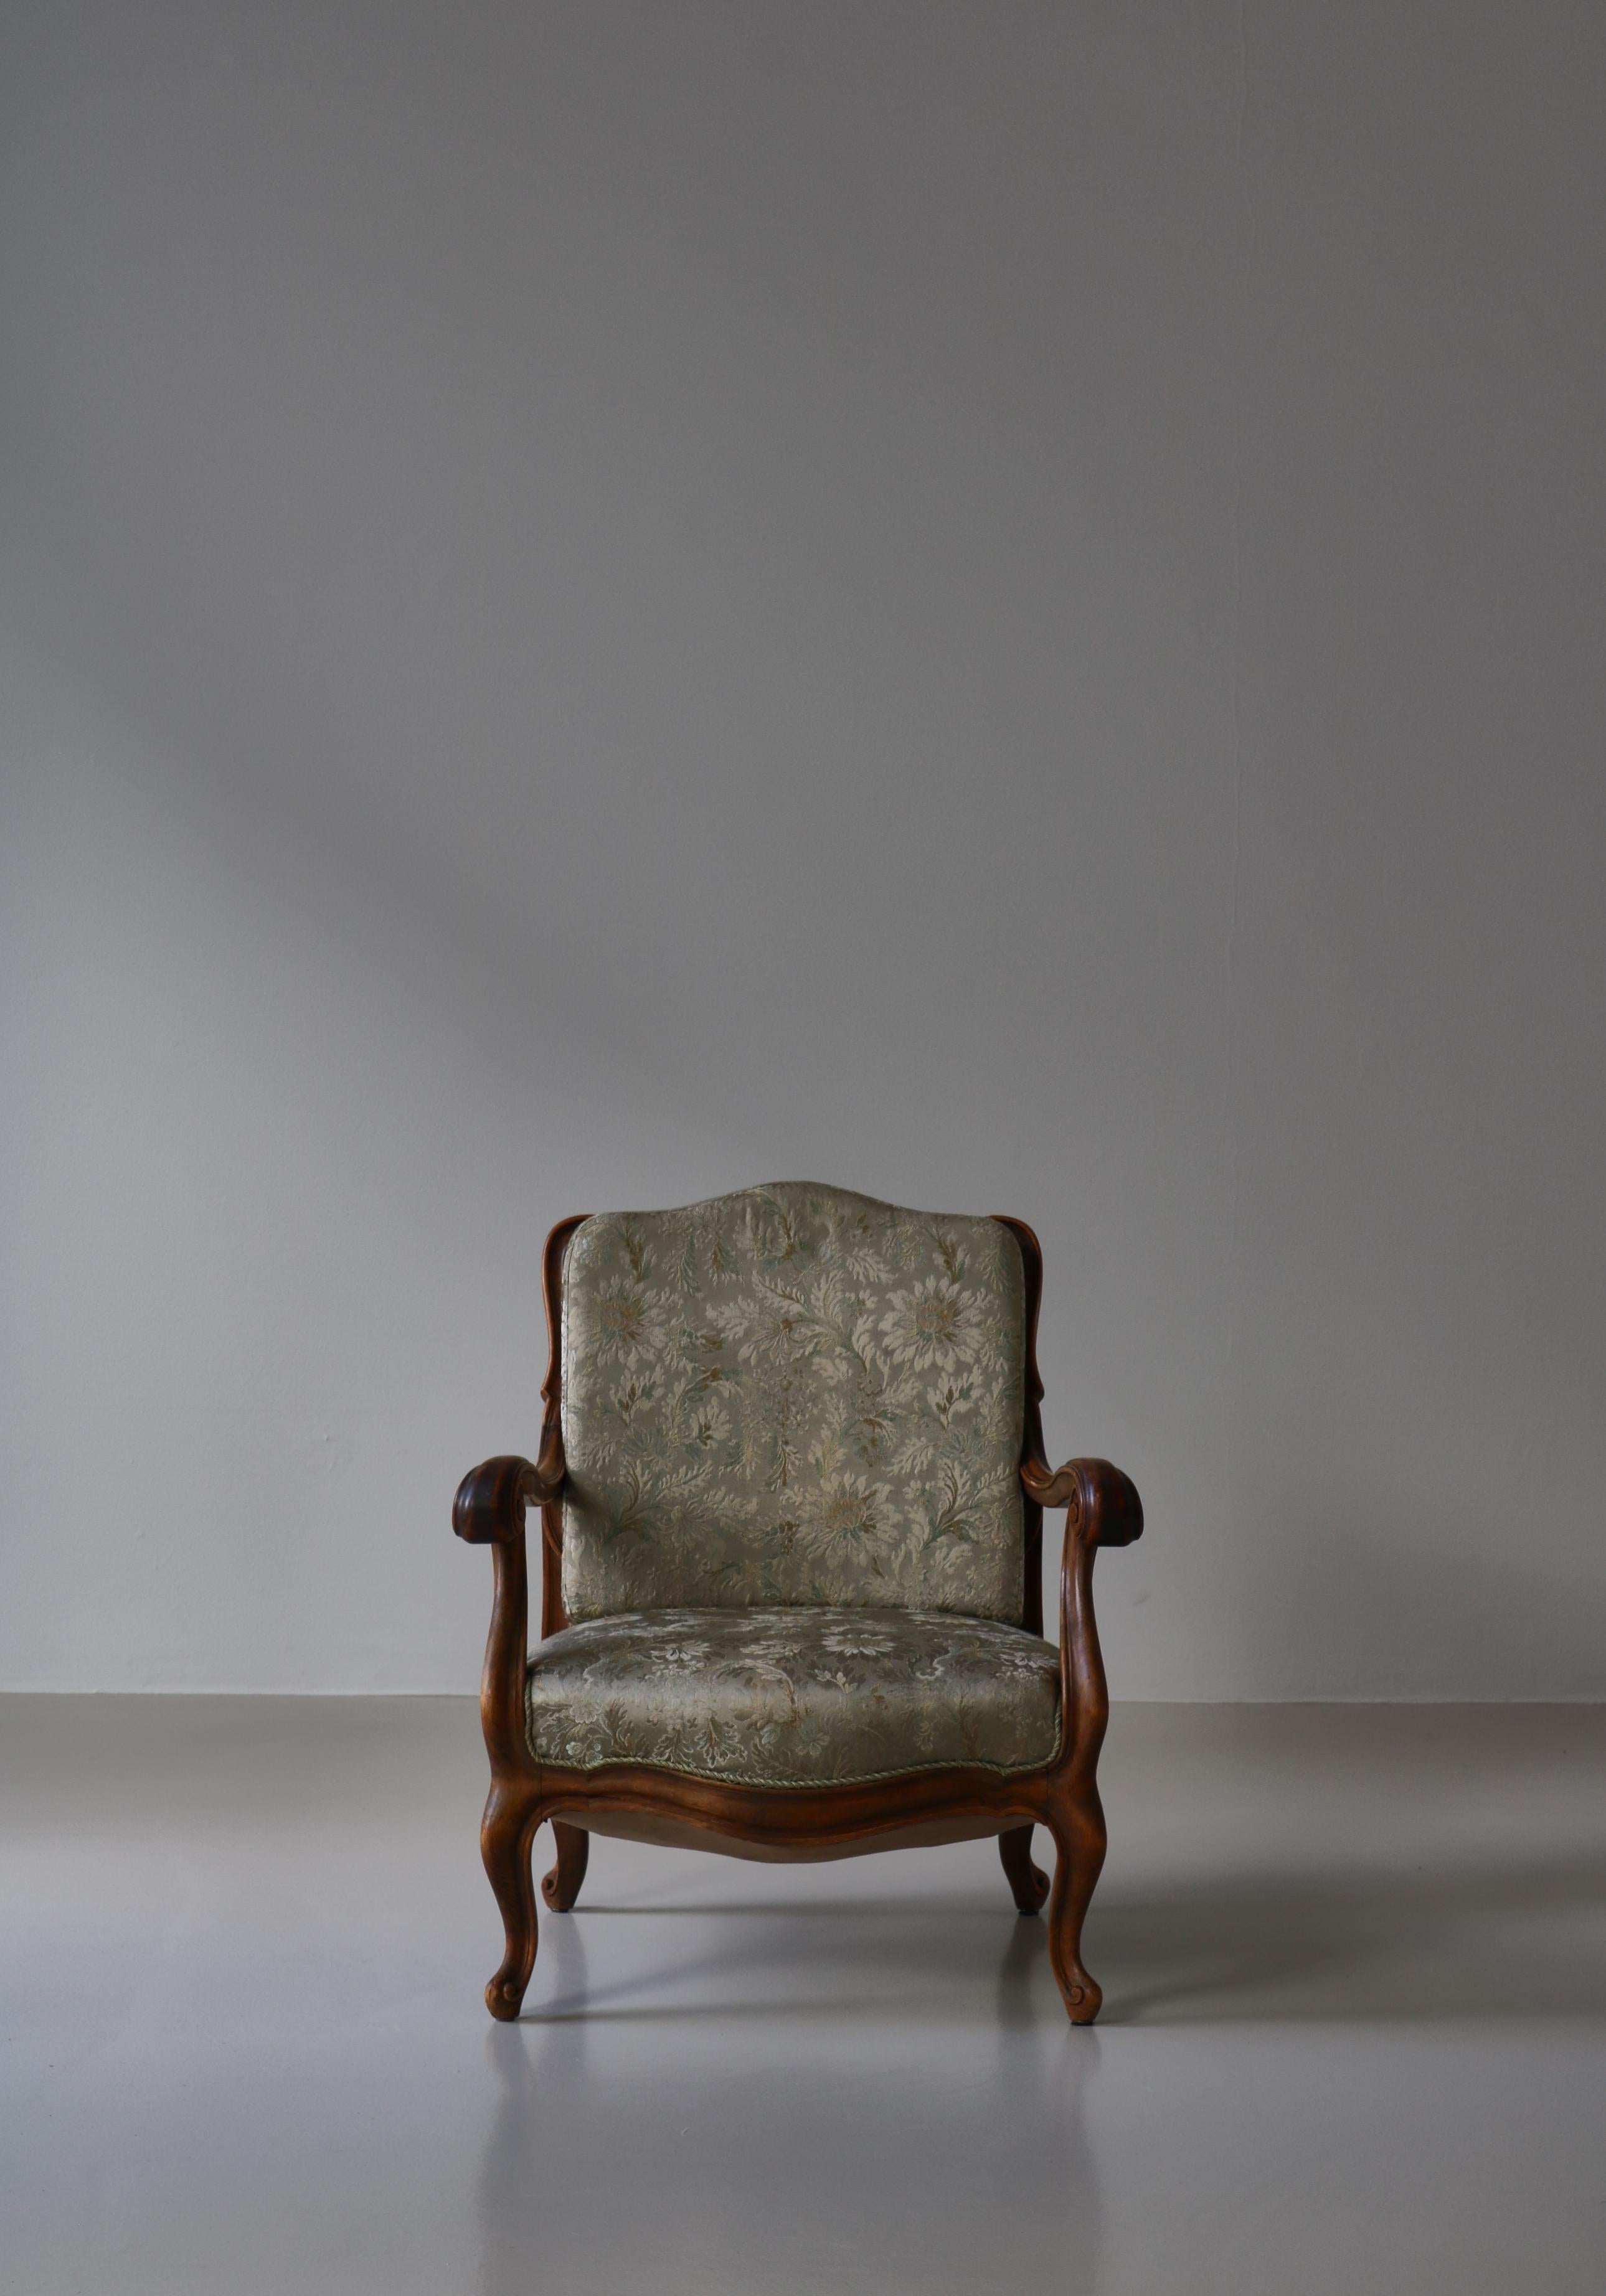 Bergére Chair Rococo Revival by Danish Cabinetmaker, Early 20th Century For Sale 2